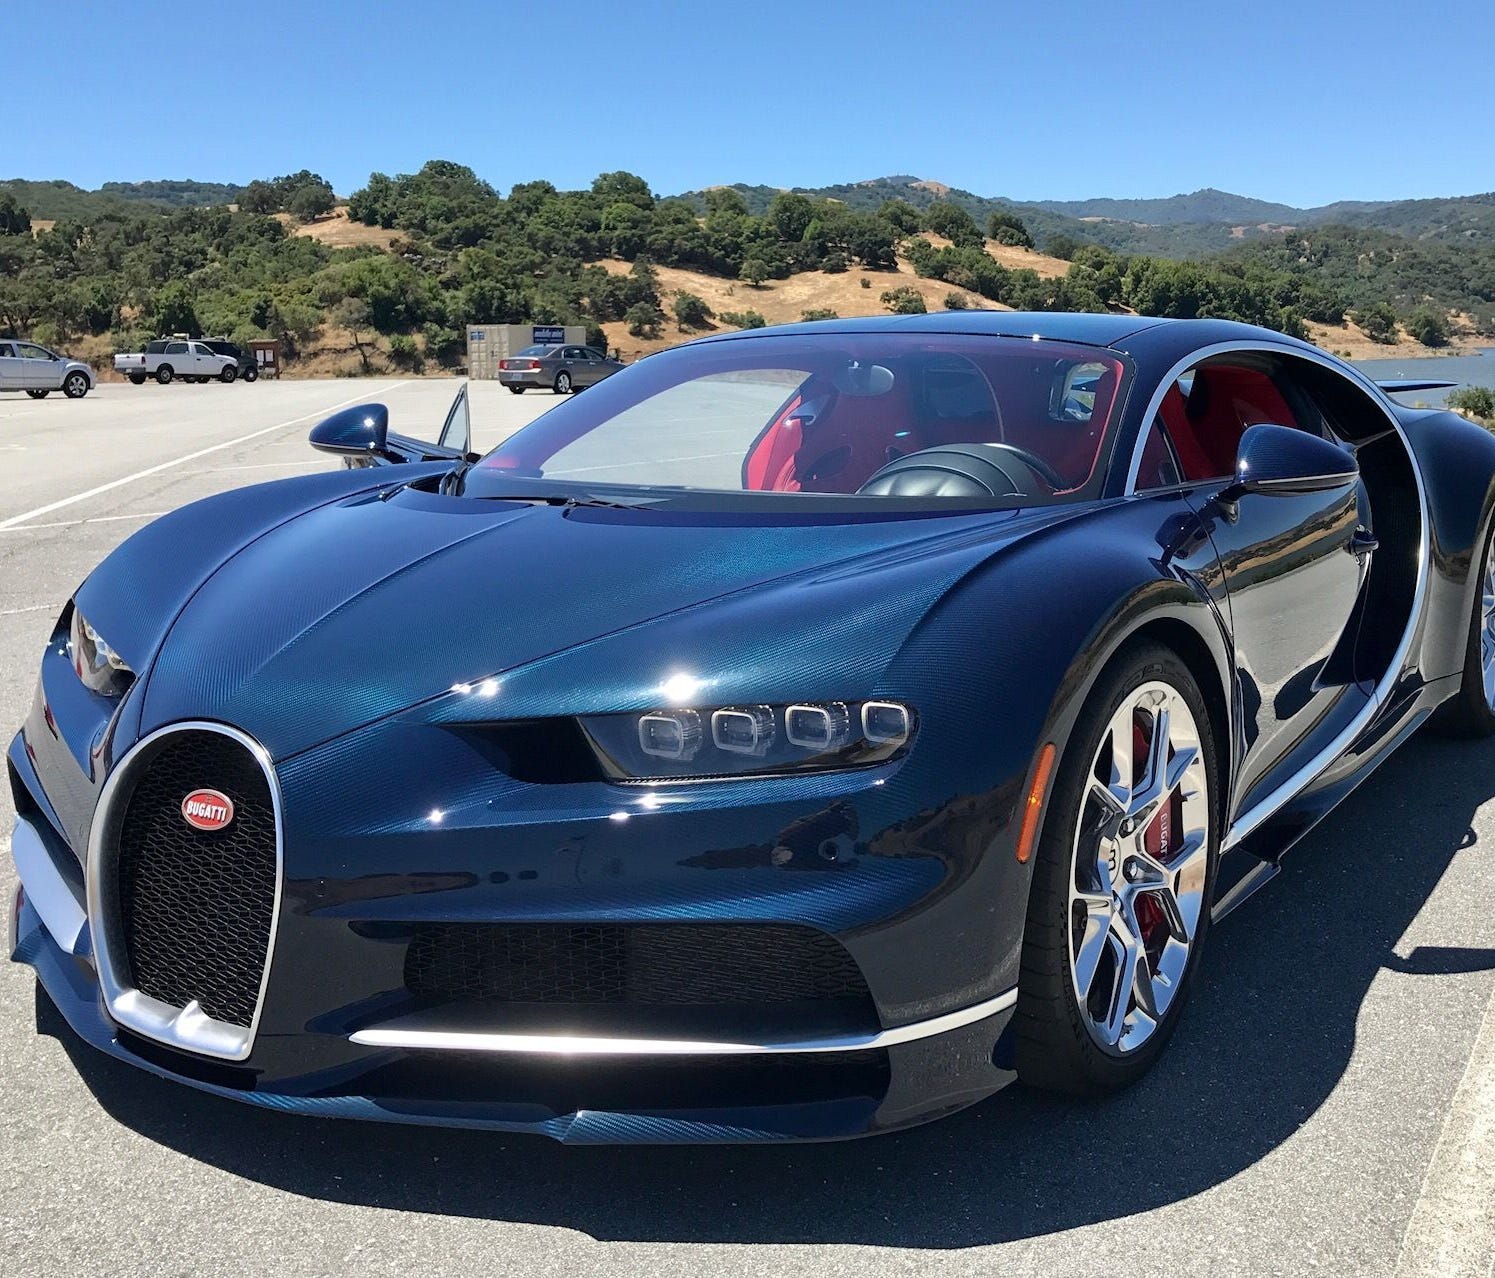 A blue Bugatti Chiron waits to be unleashed on the rural roads near Los Gatos, Calif. The $3 million, 1,500 horsepower supercar will be limited to 500 models.